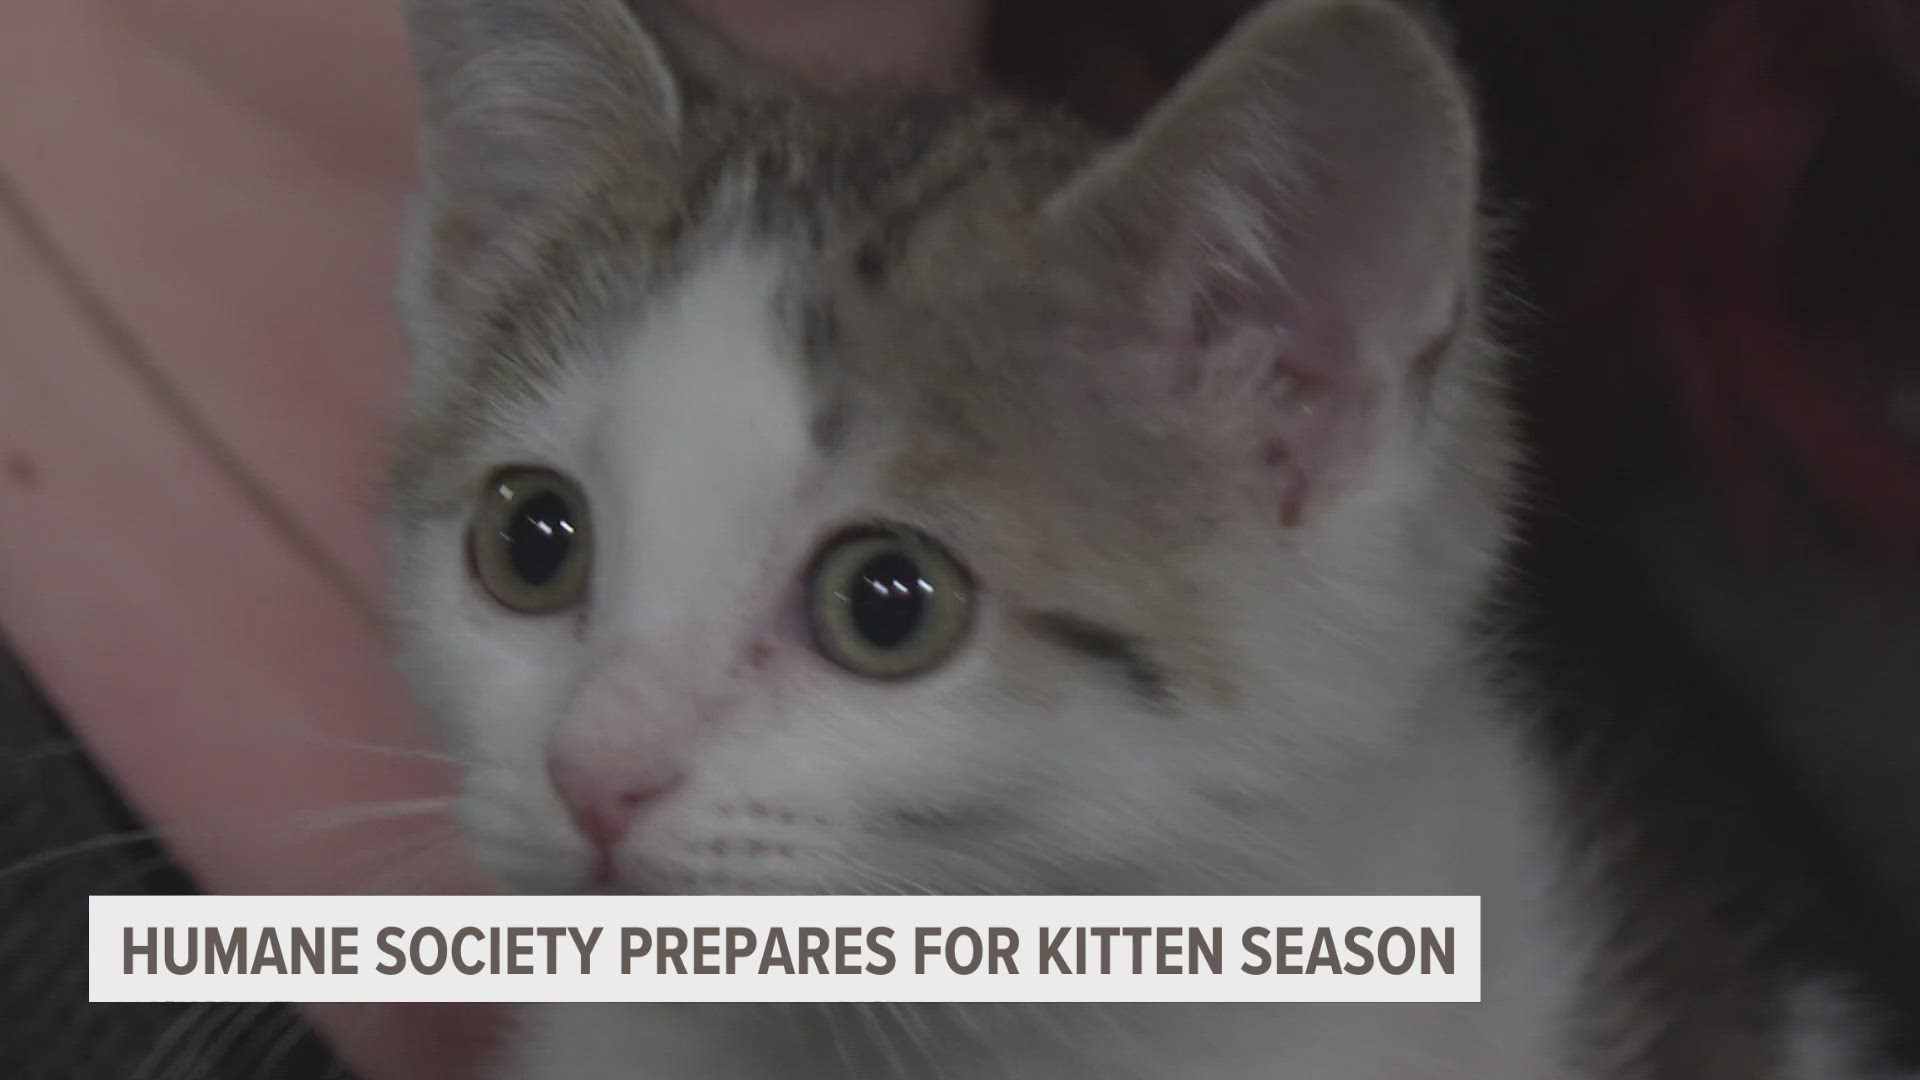 The humane society said they get an influx of kittens this time of year.